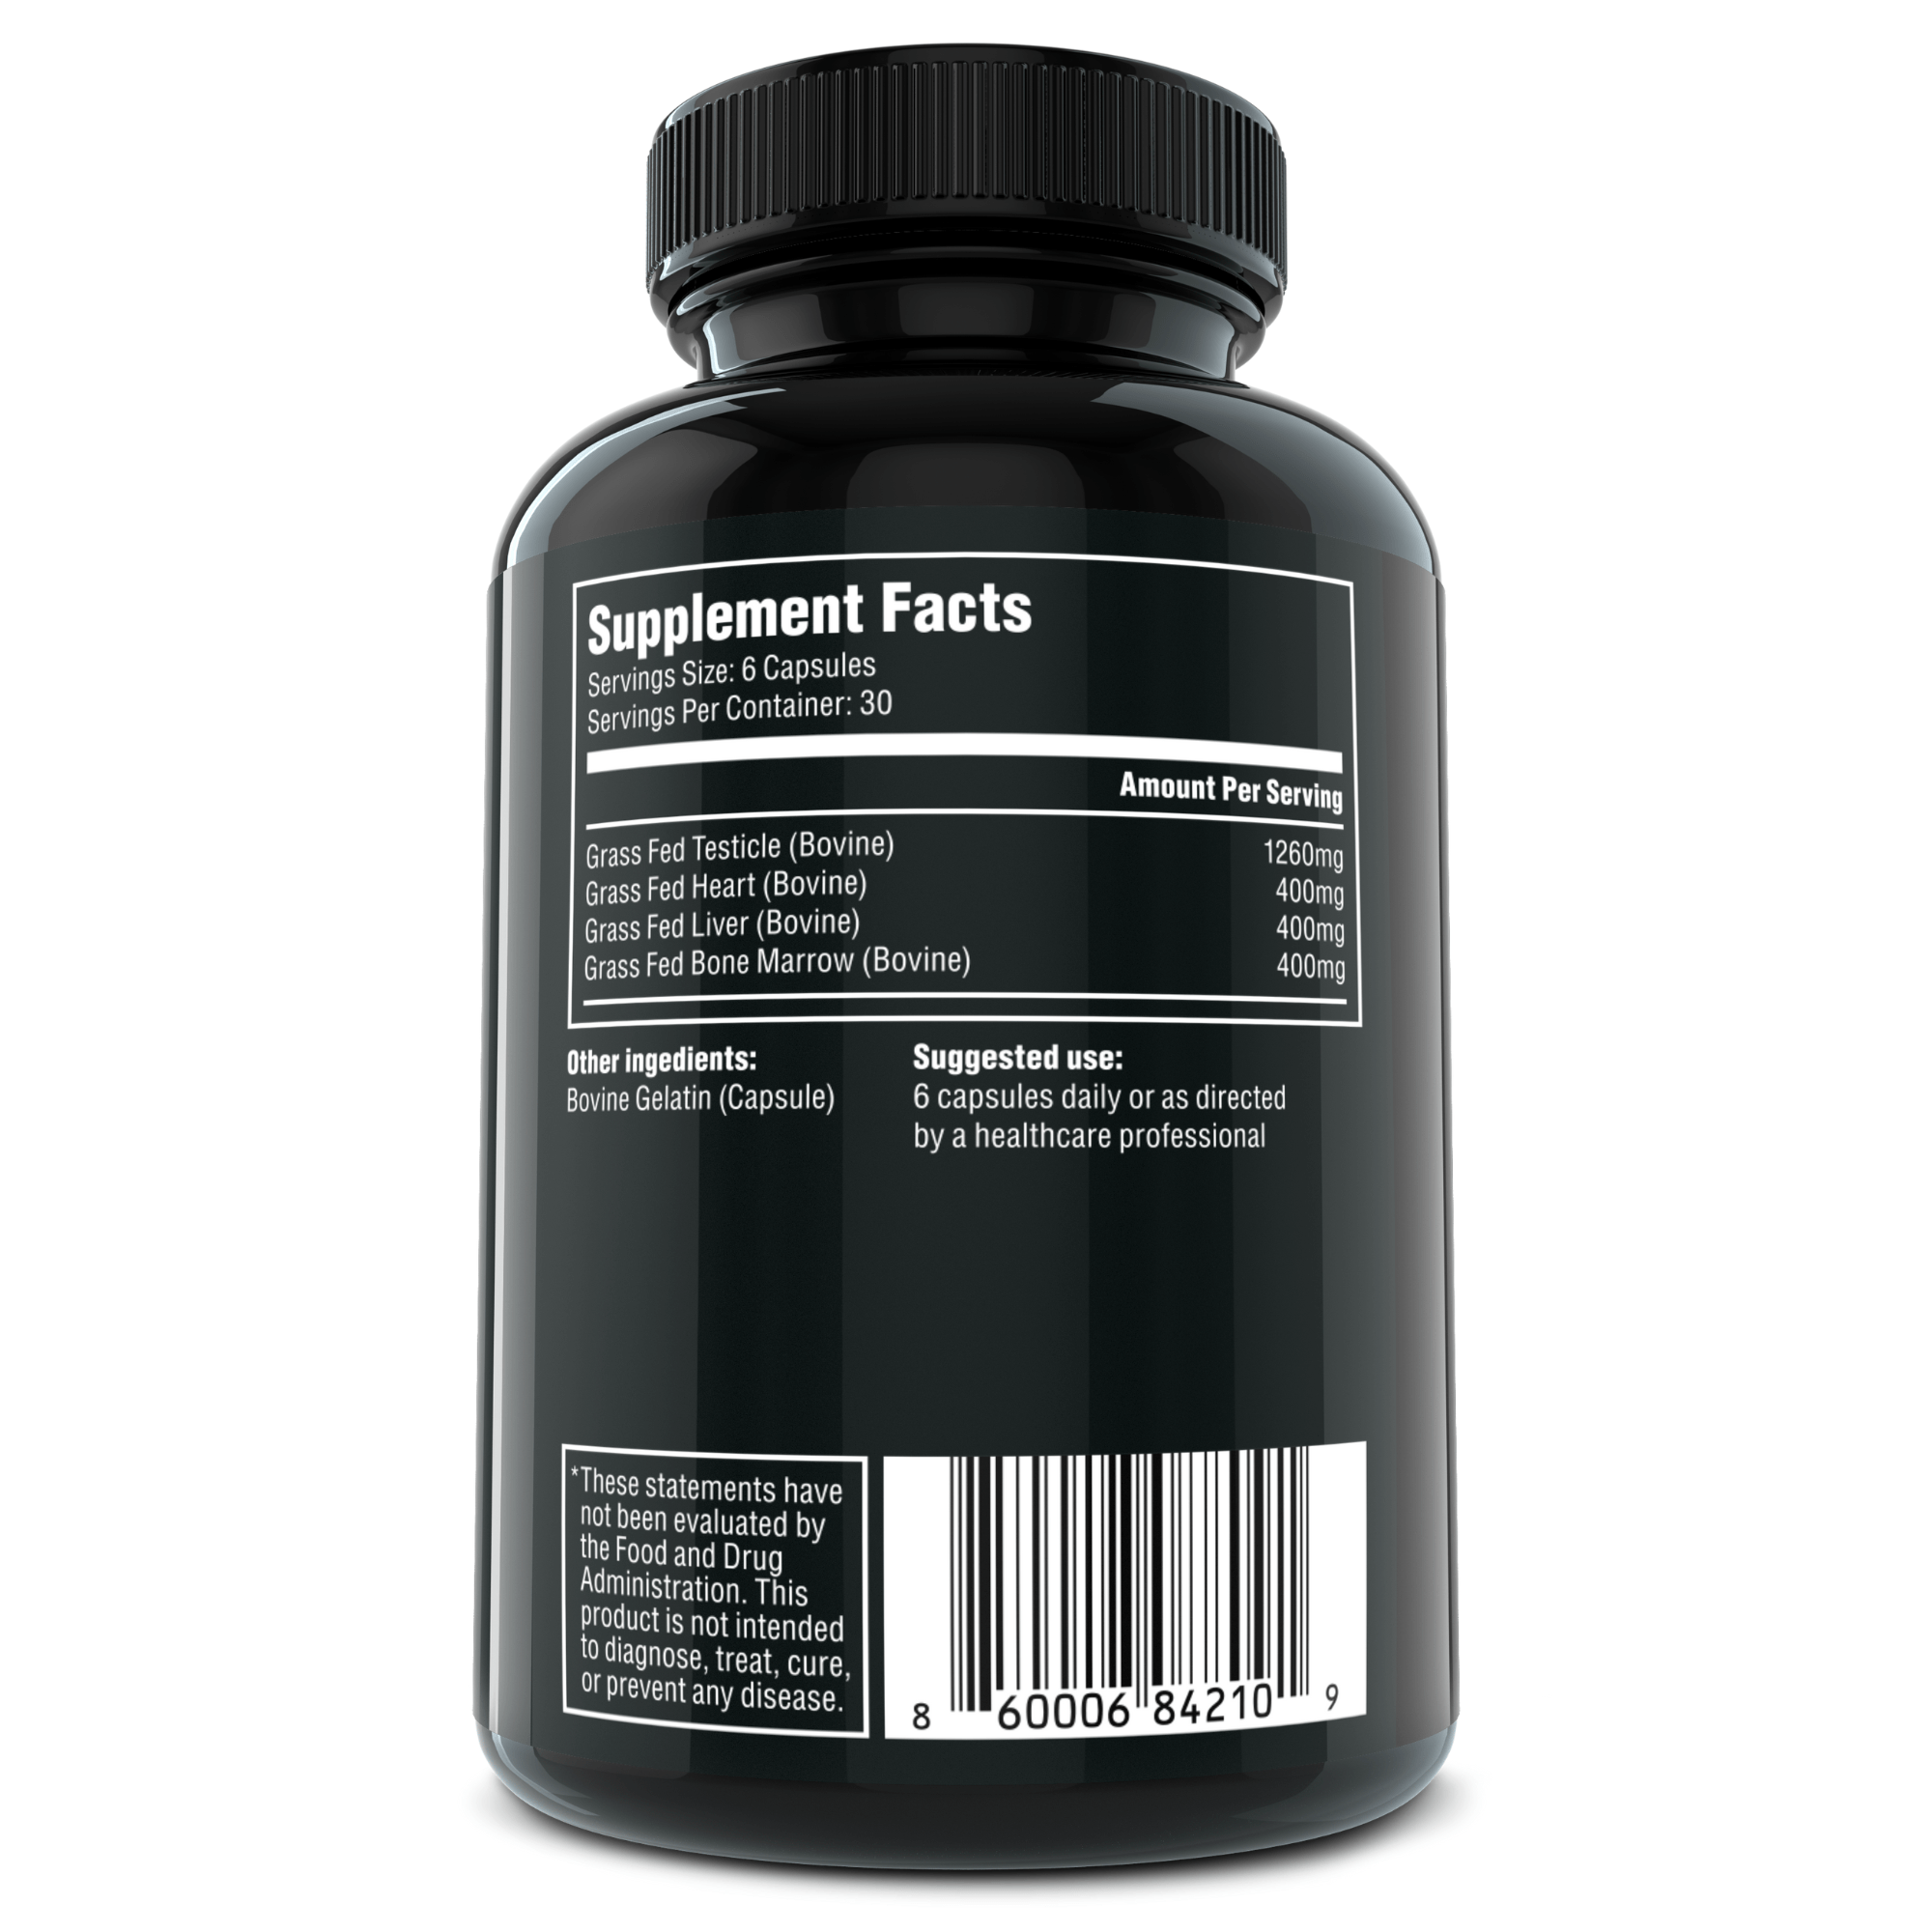 Back of the bottle of King showing the complete supplement facts panel with bovine tresticle, heart, liver and bone marrow